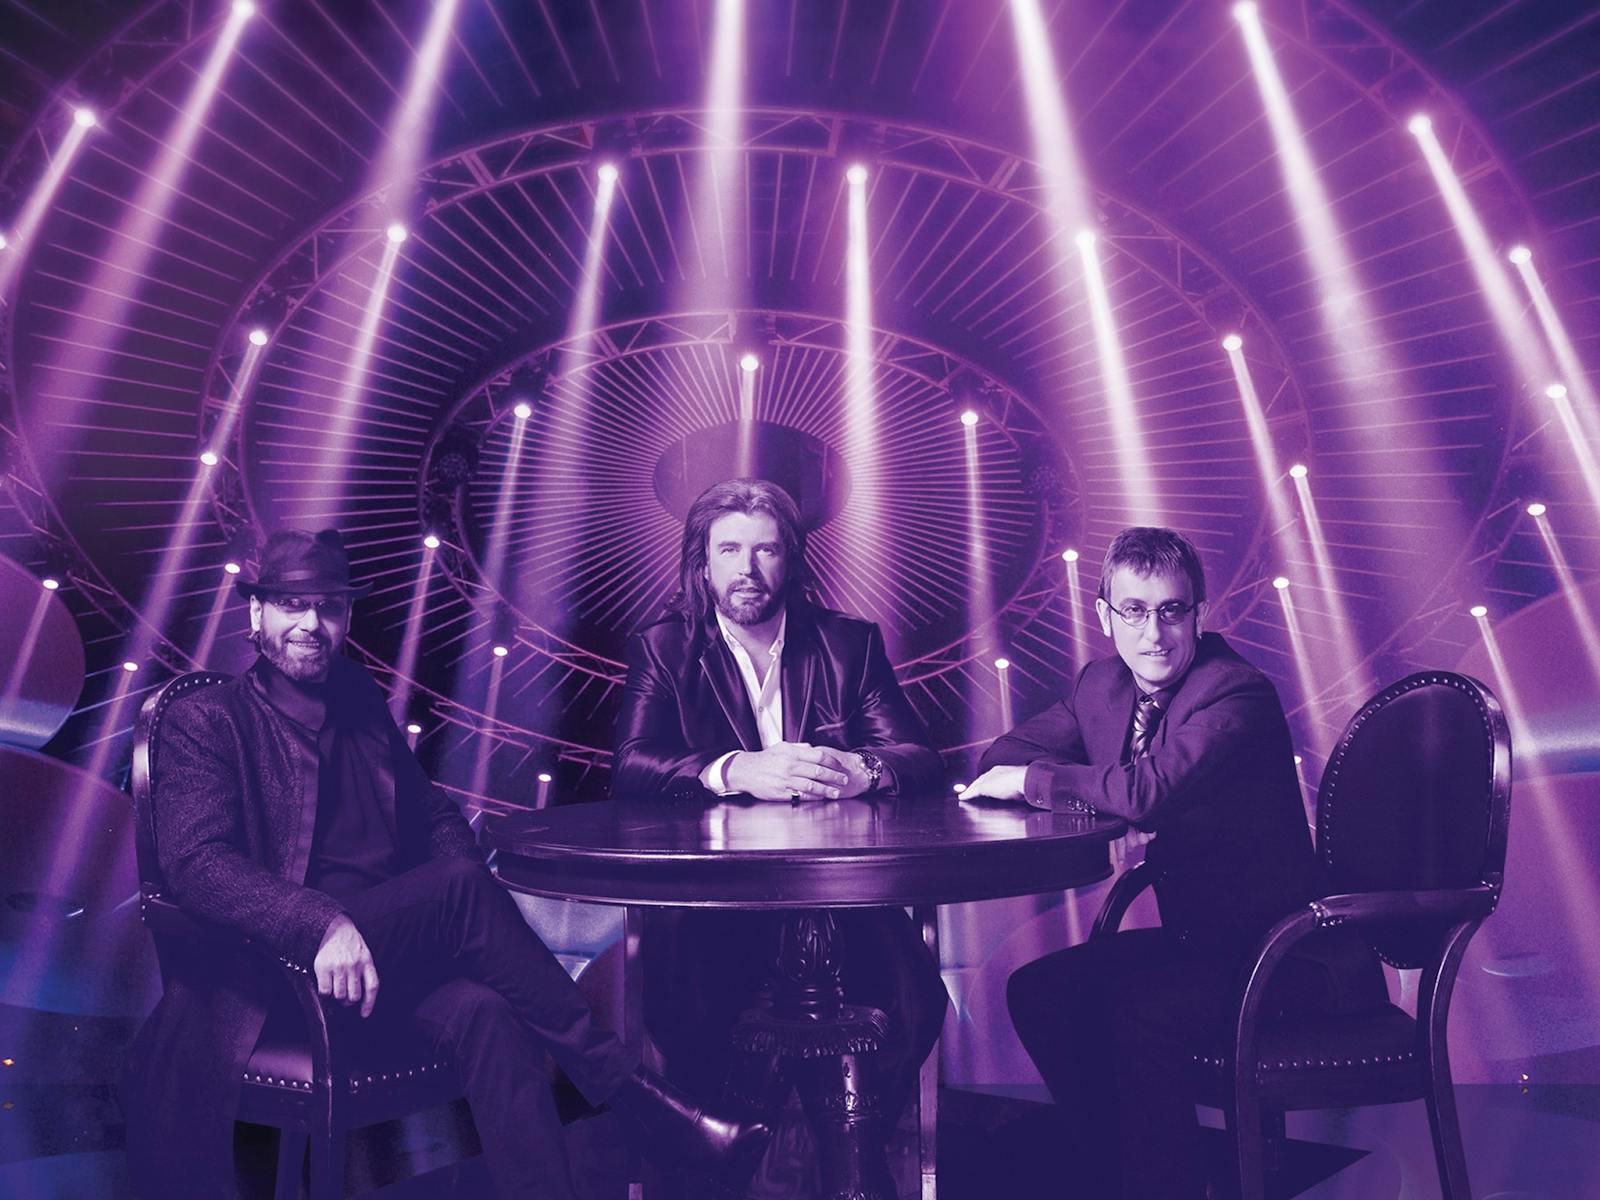 Image for The Australian Bee Gees Show - 25th Anniversary Tour - Echuca